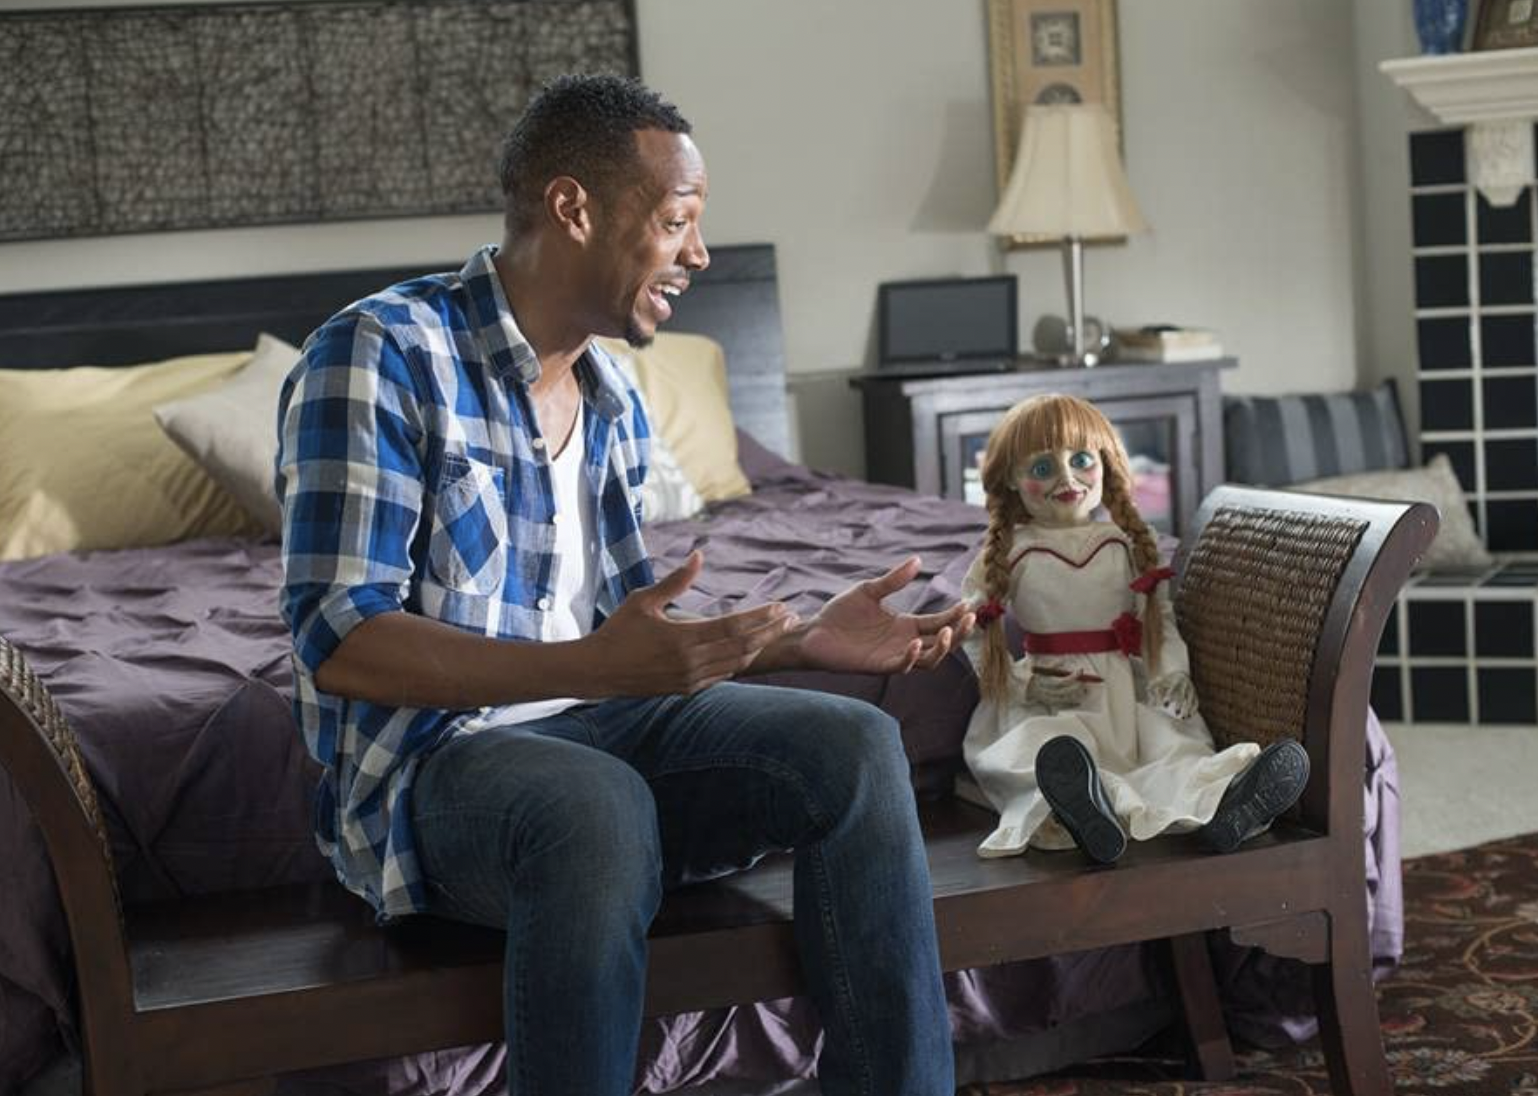 Marlon Wayans in "A Haunted House 2"